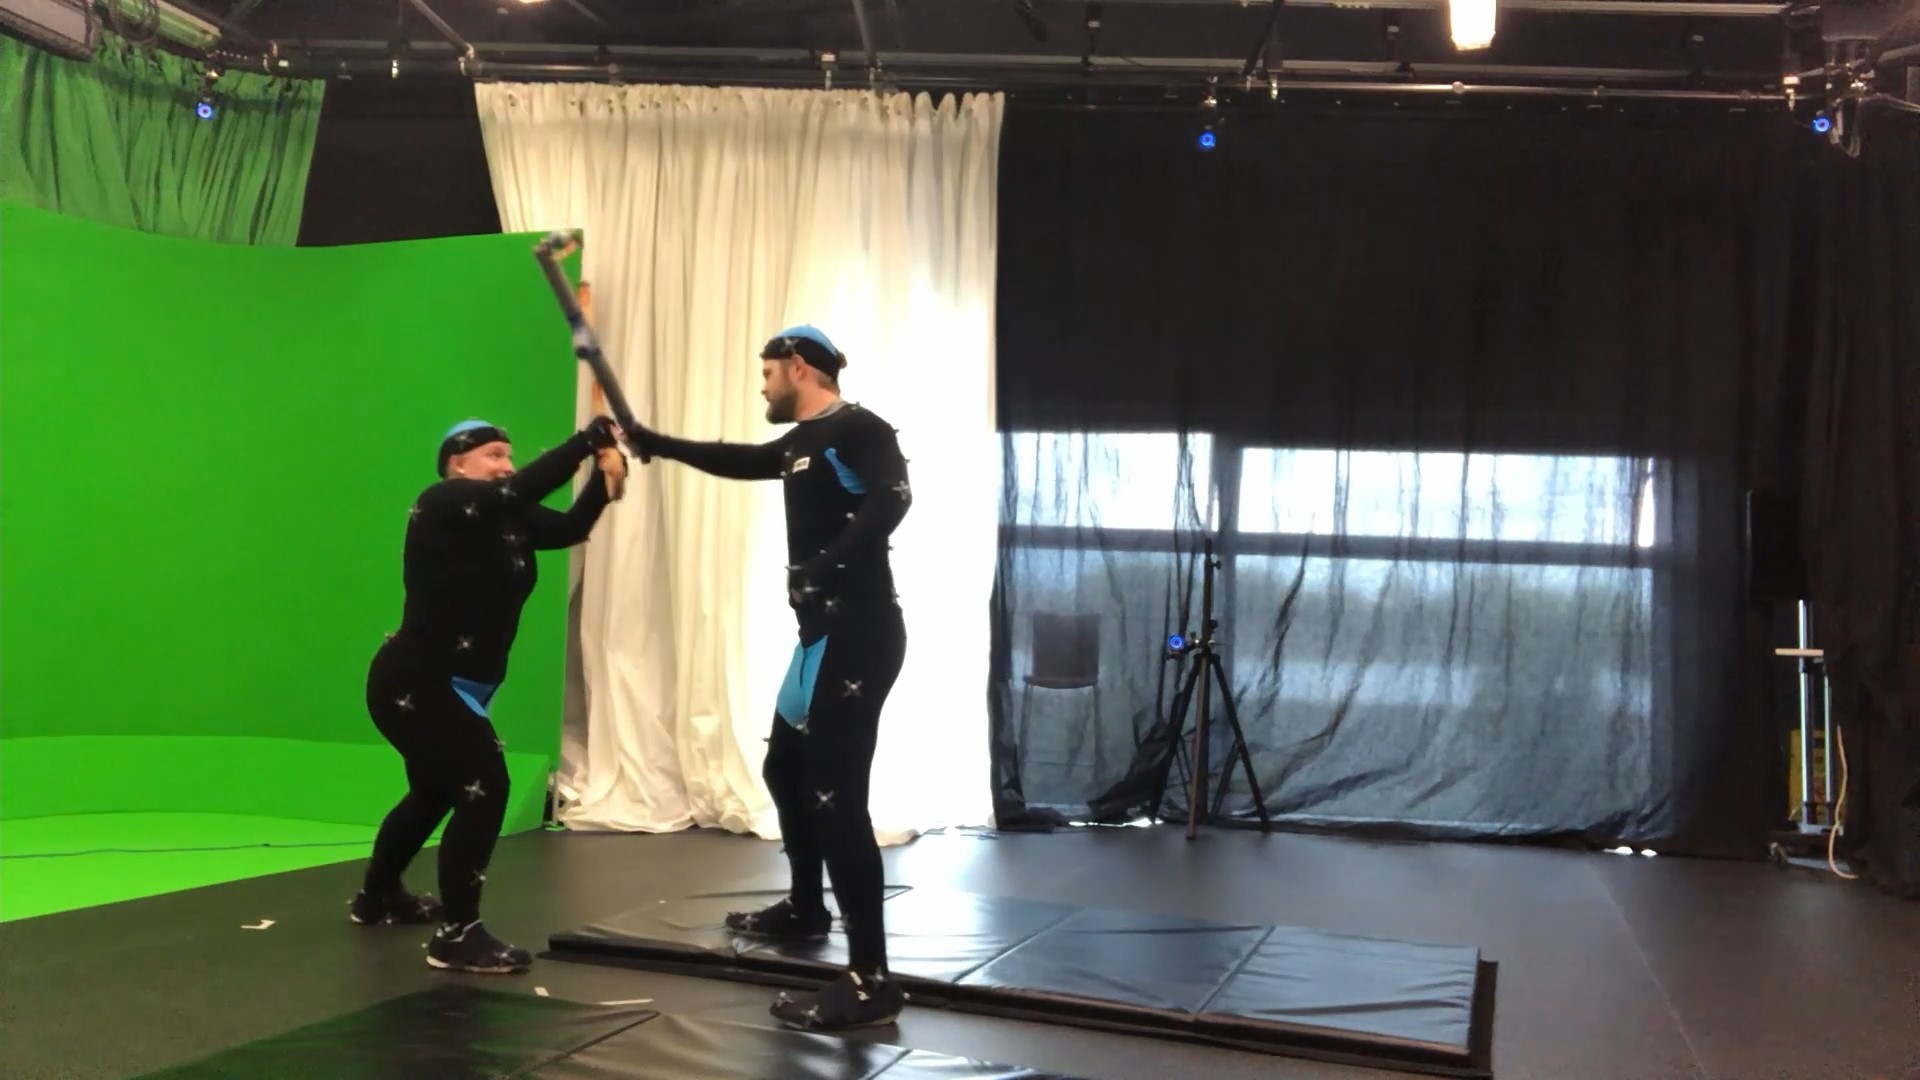 Image shows student Katherine Jarema acting out in the mocap suit for her project